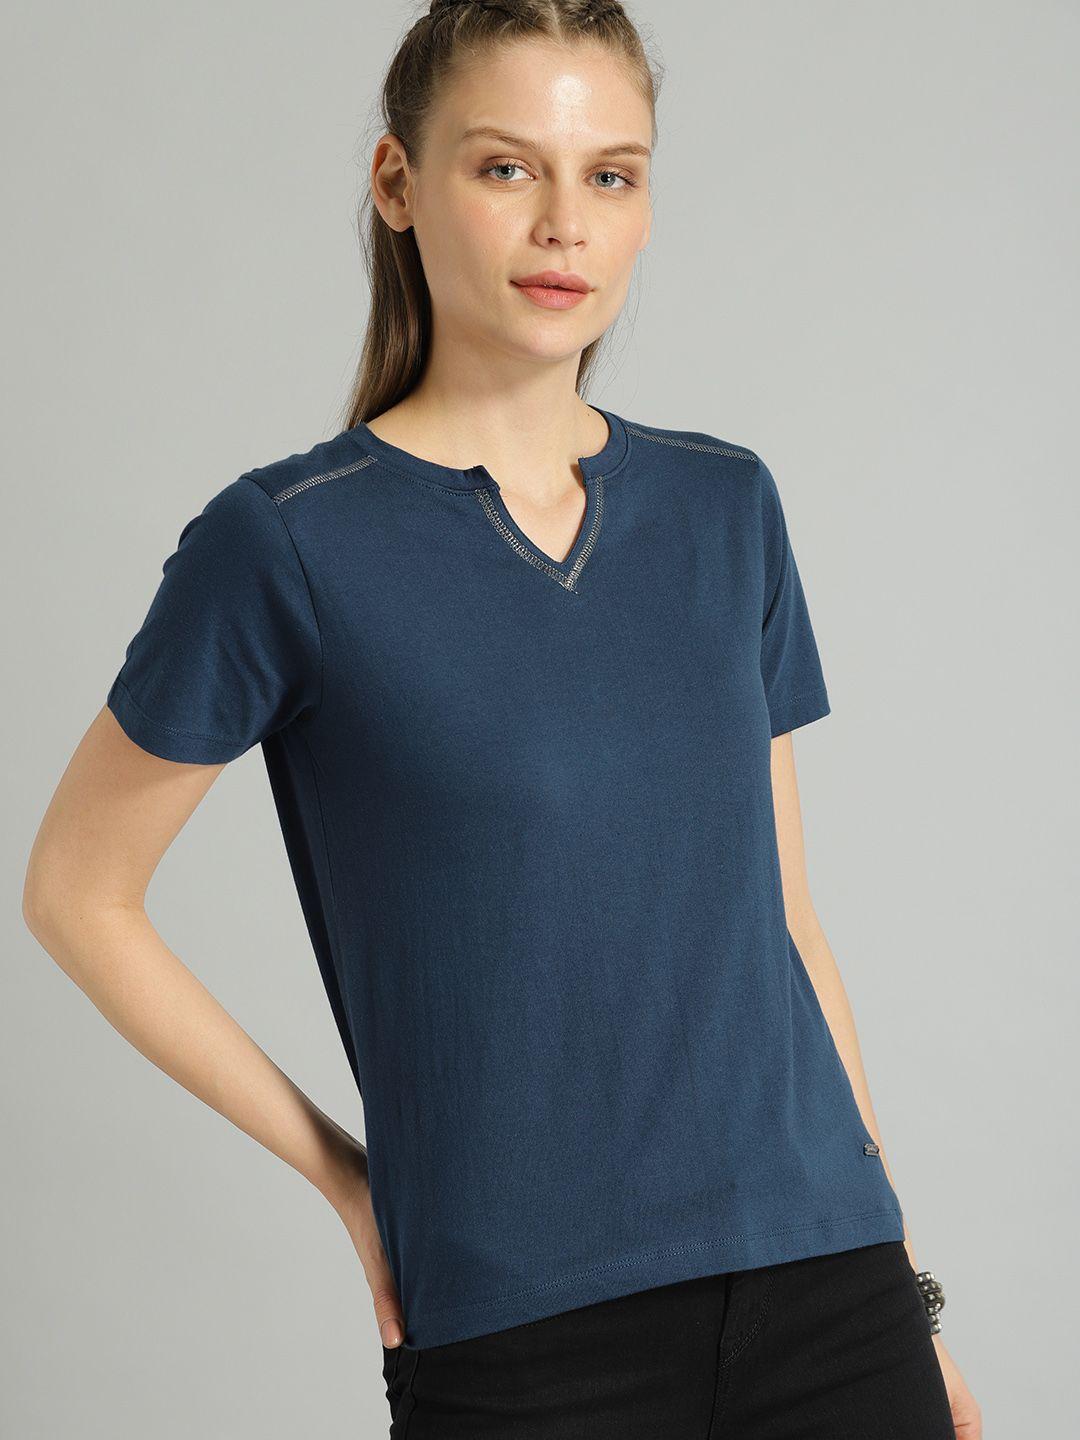 the roadster lifestyle co women navy blue solid v-neck pure cotton t-shirt